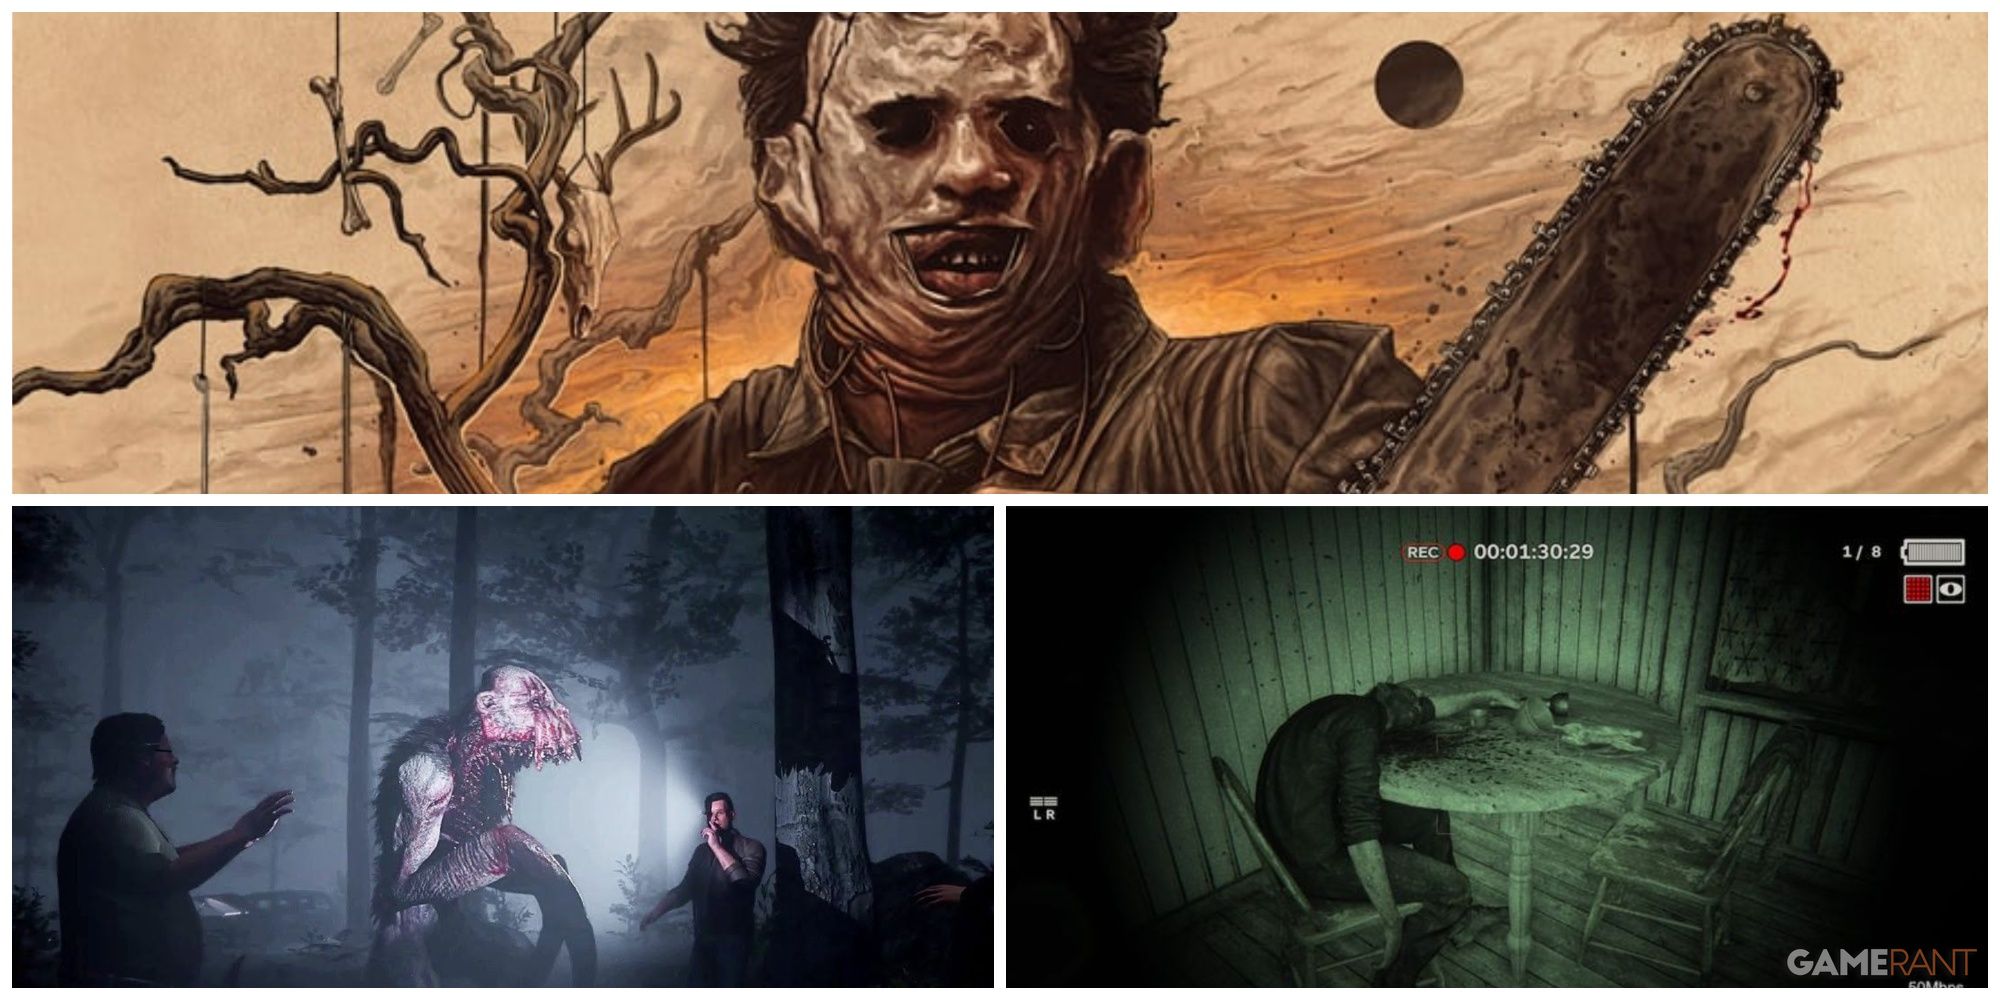 Texas chain saw massacre, In Silence, and Outlast games